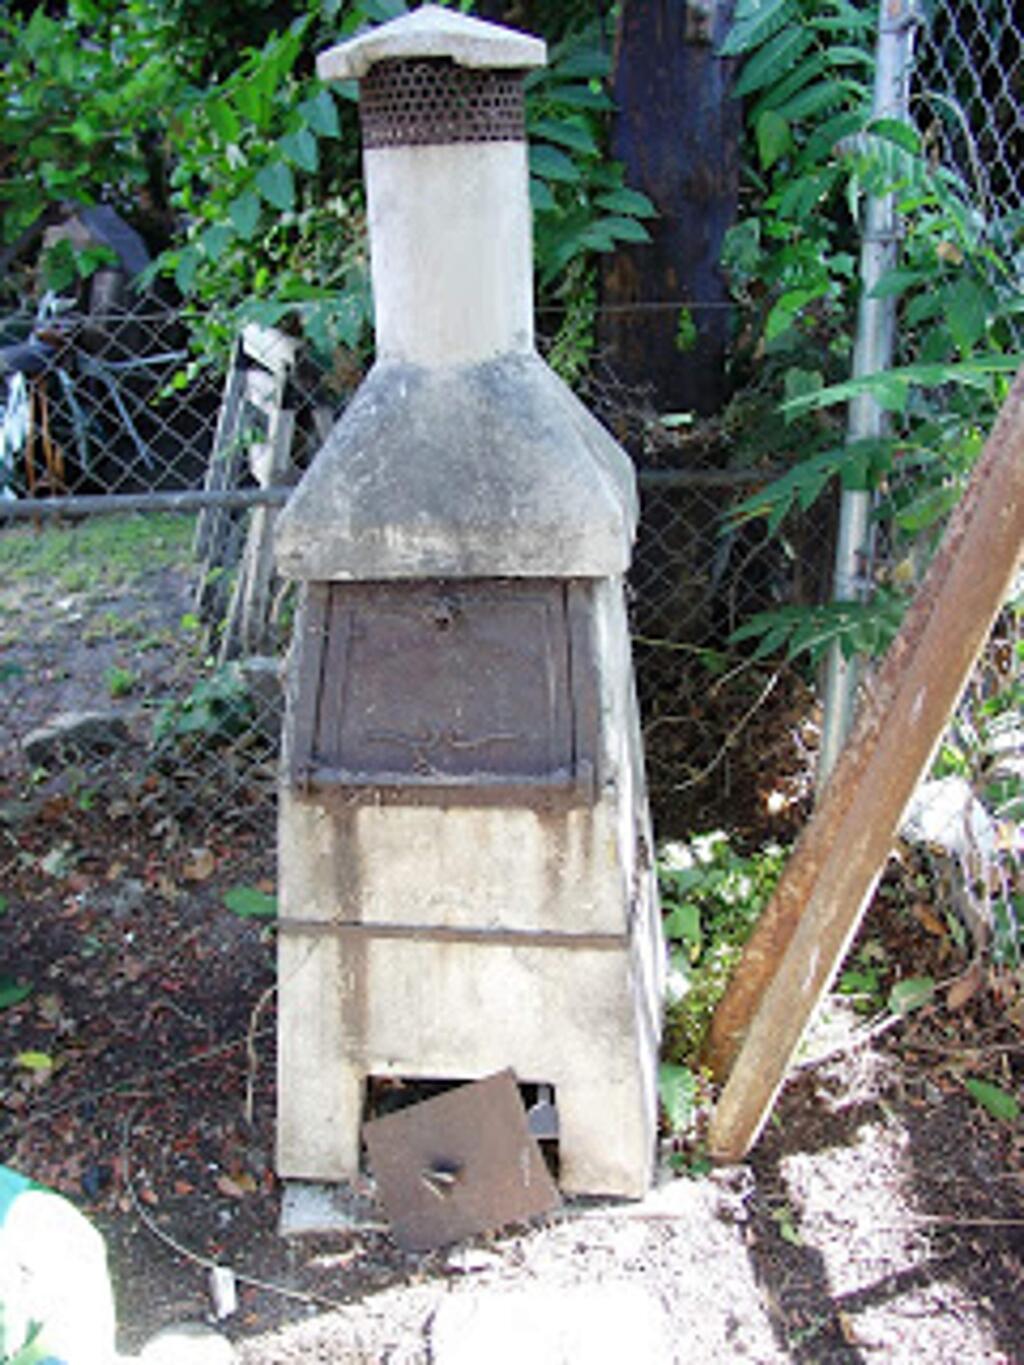 Backyard incinerators such as this one were a common residential appliance before centralized garbage pickup became a thing.